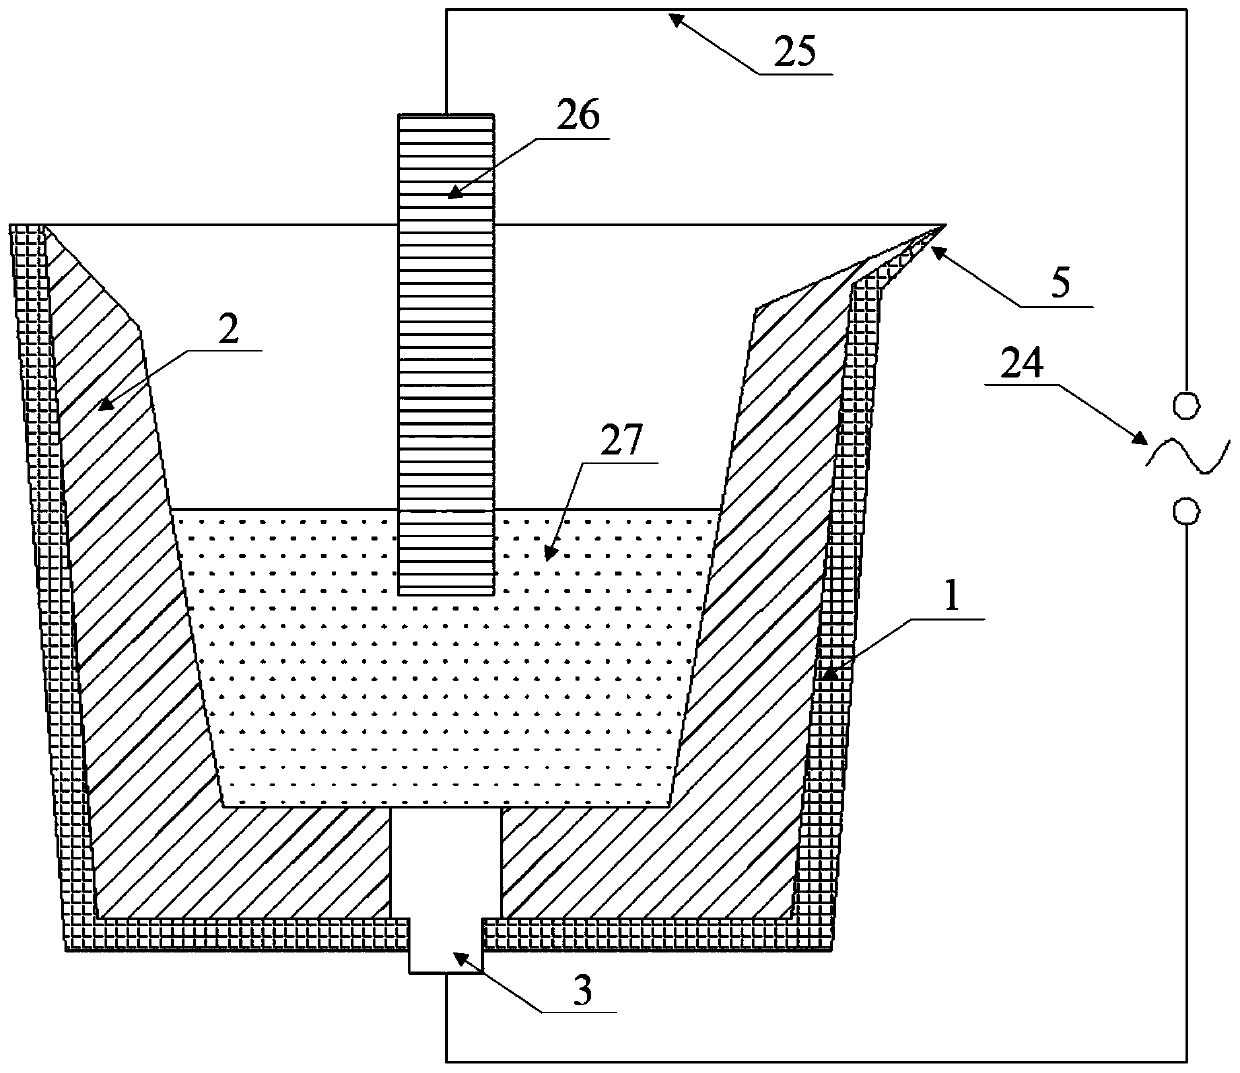 A device and method for preparing bimetallic composite rolls by electroslag remelting